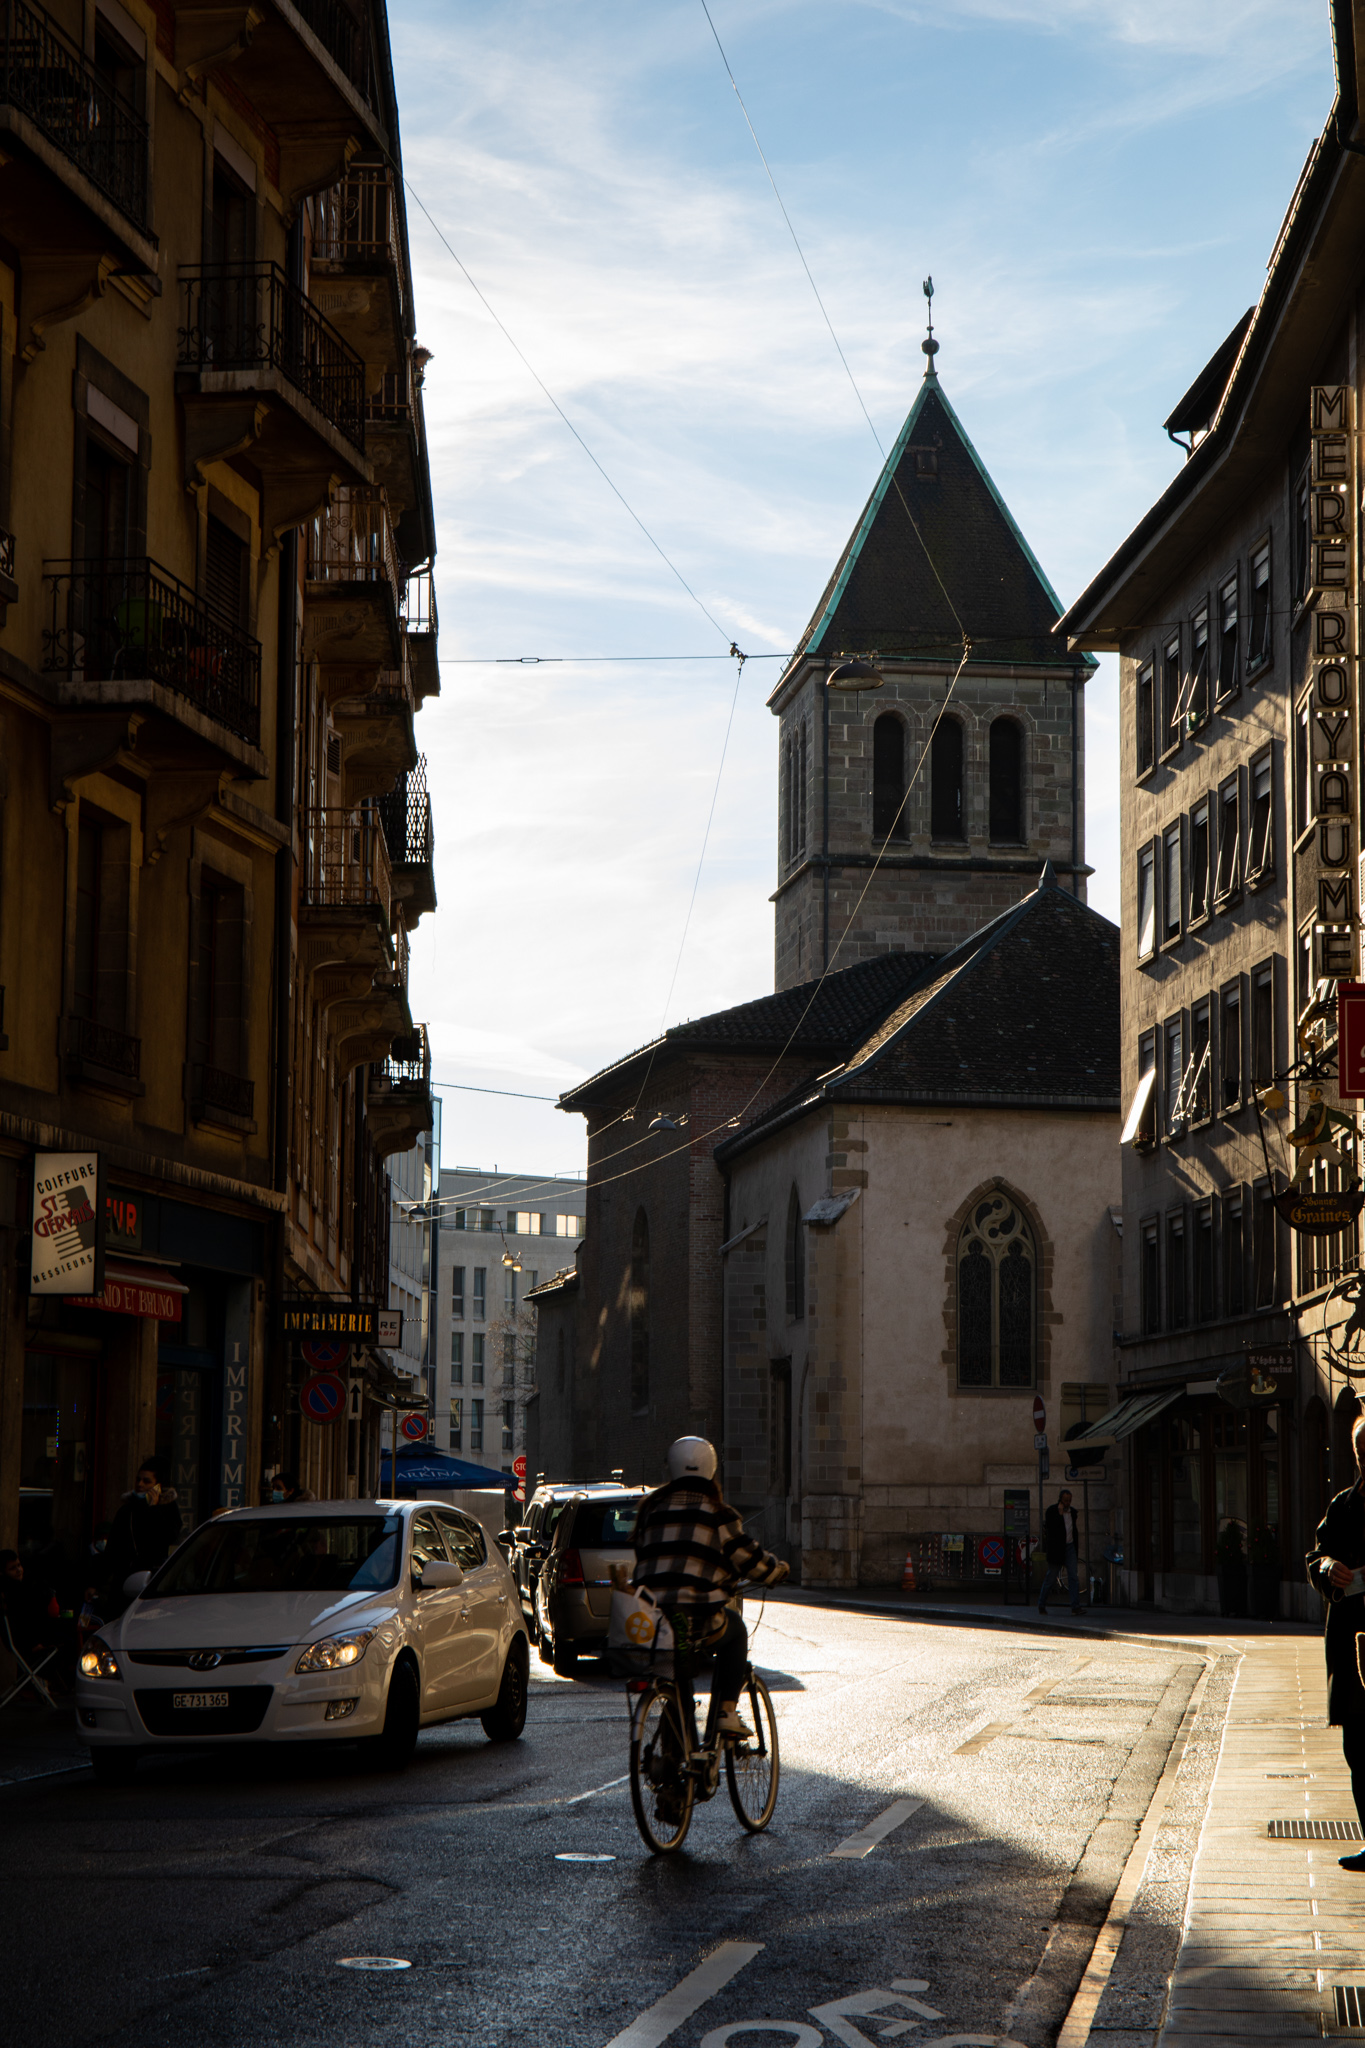 Photography Outdoors Urban Church Bicycle City Building Architecture Car Street Vertical 1365x2048